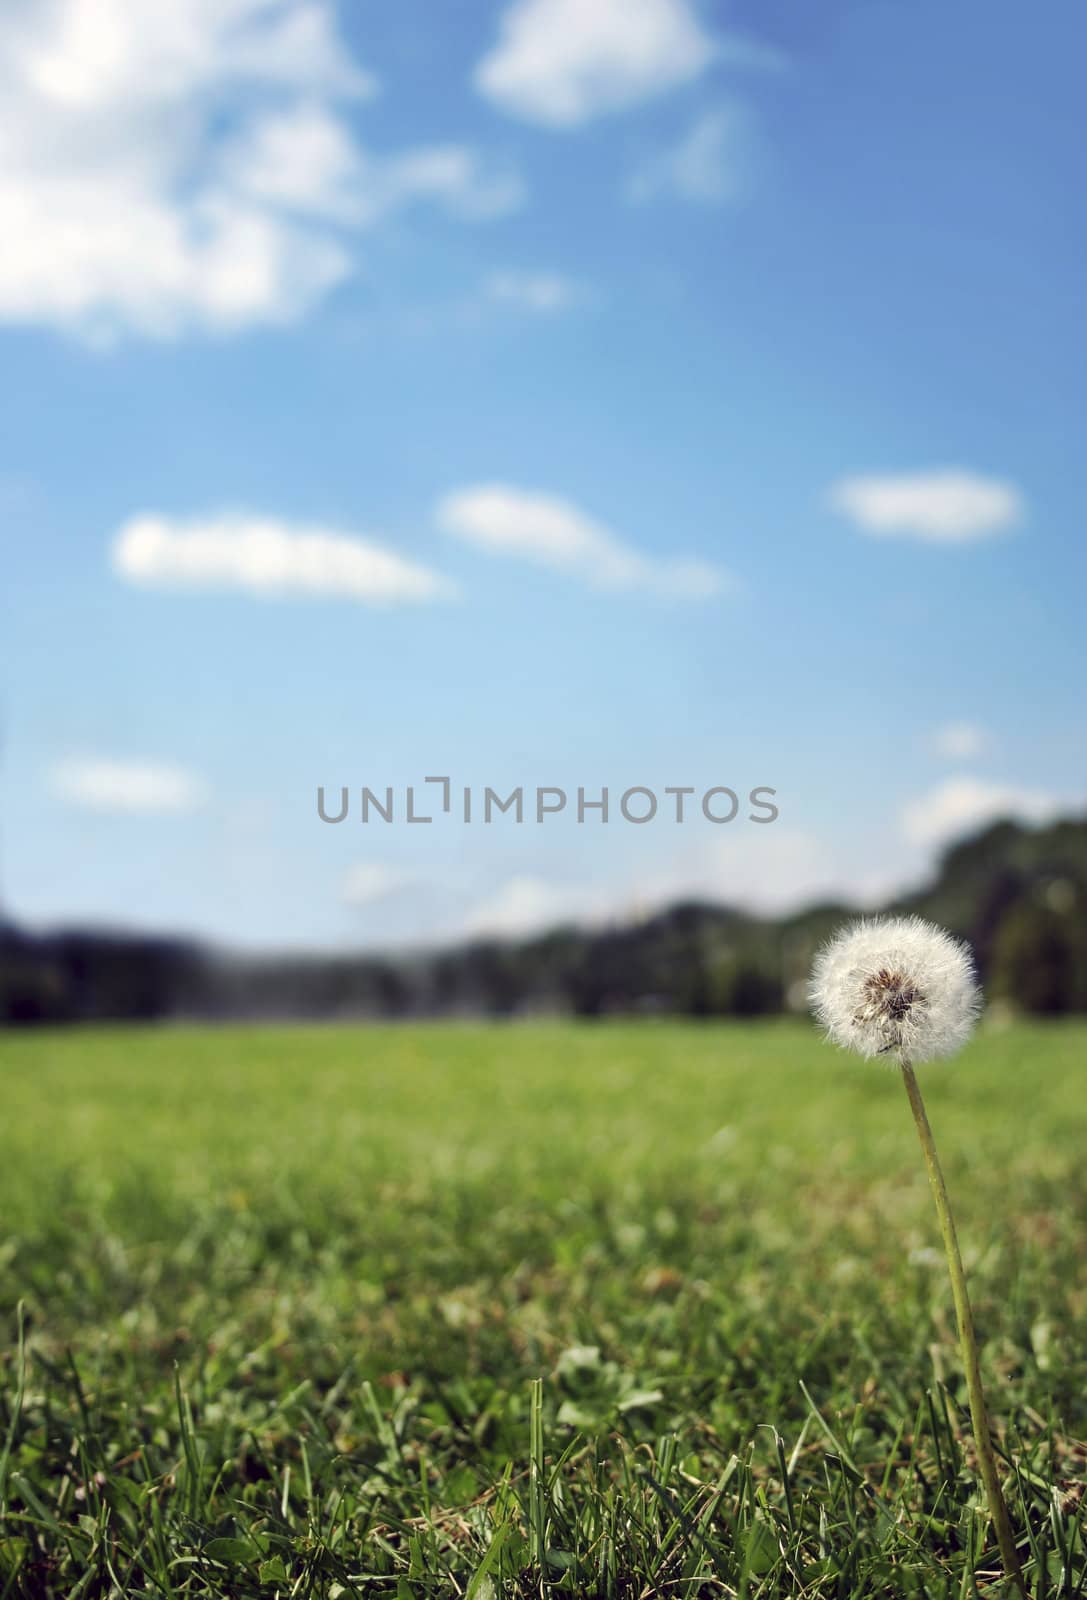 Nice background with fresh grass, flower, meadow and blue sky

